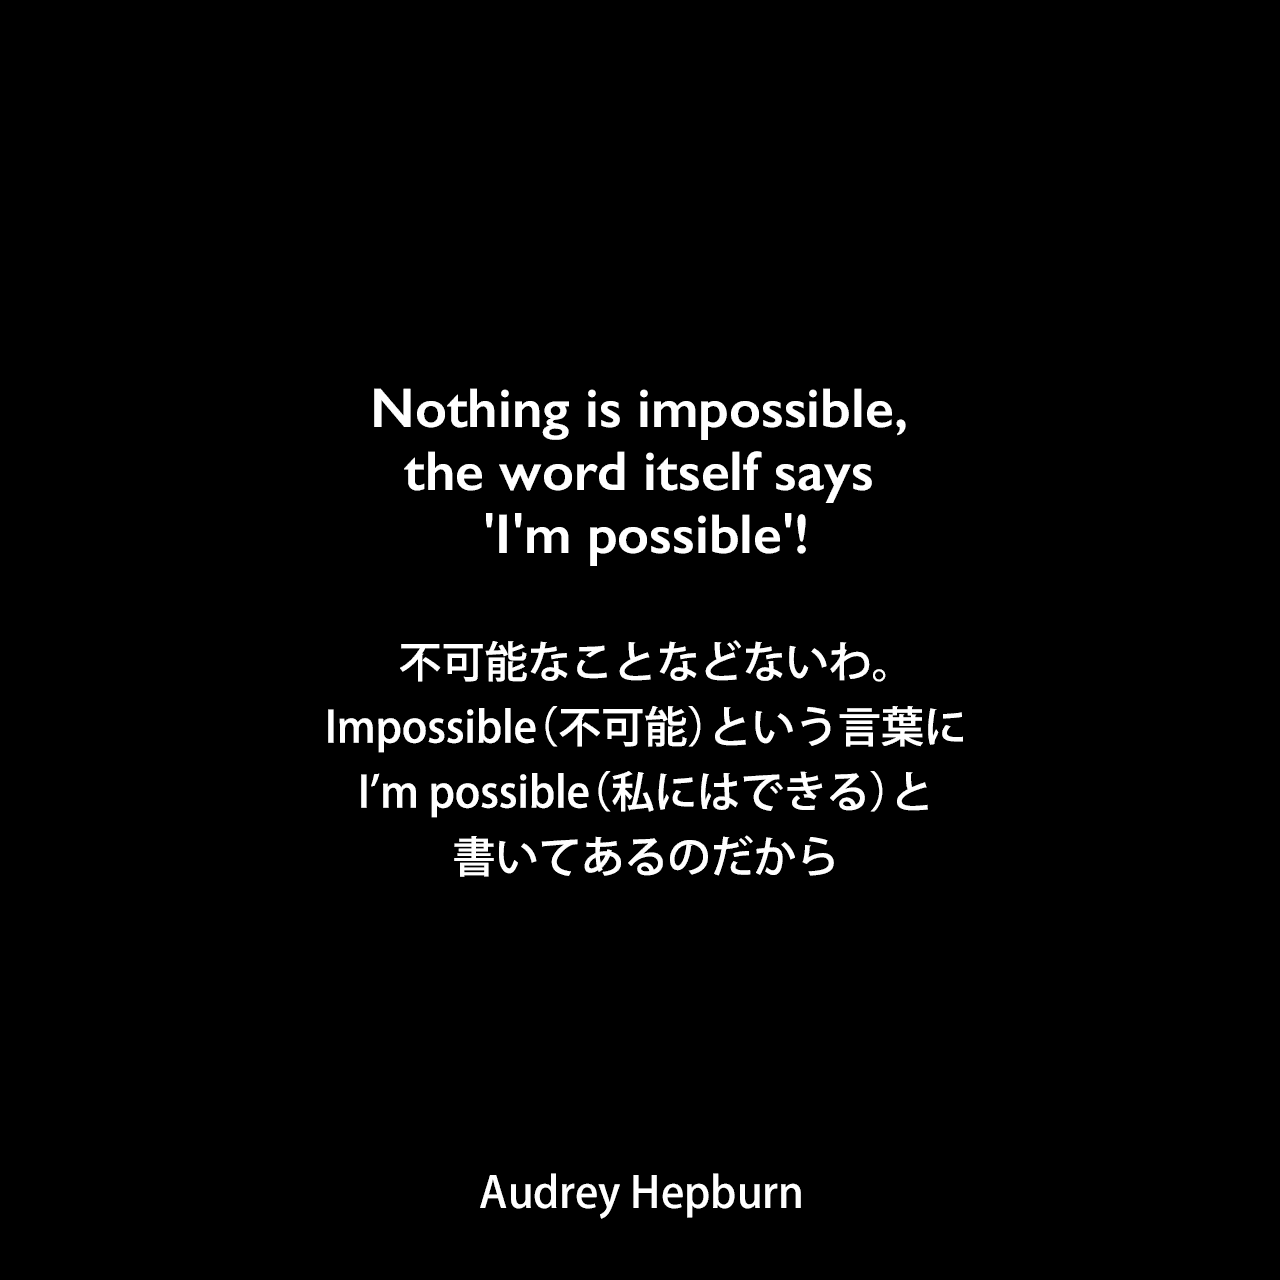 Nothing is impossible, the word itself says 'I'm possible'!不可能なことなどないわ。Impossible（不可能）という言葉に、I’m possible（私にはできる）と書いてあるのだからAudrey Hepburn